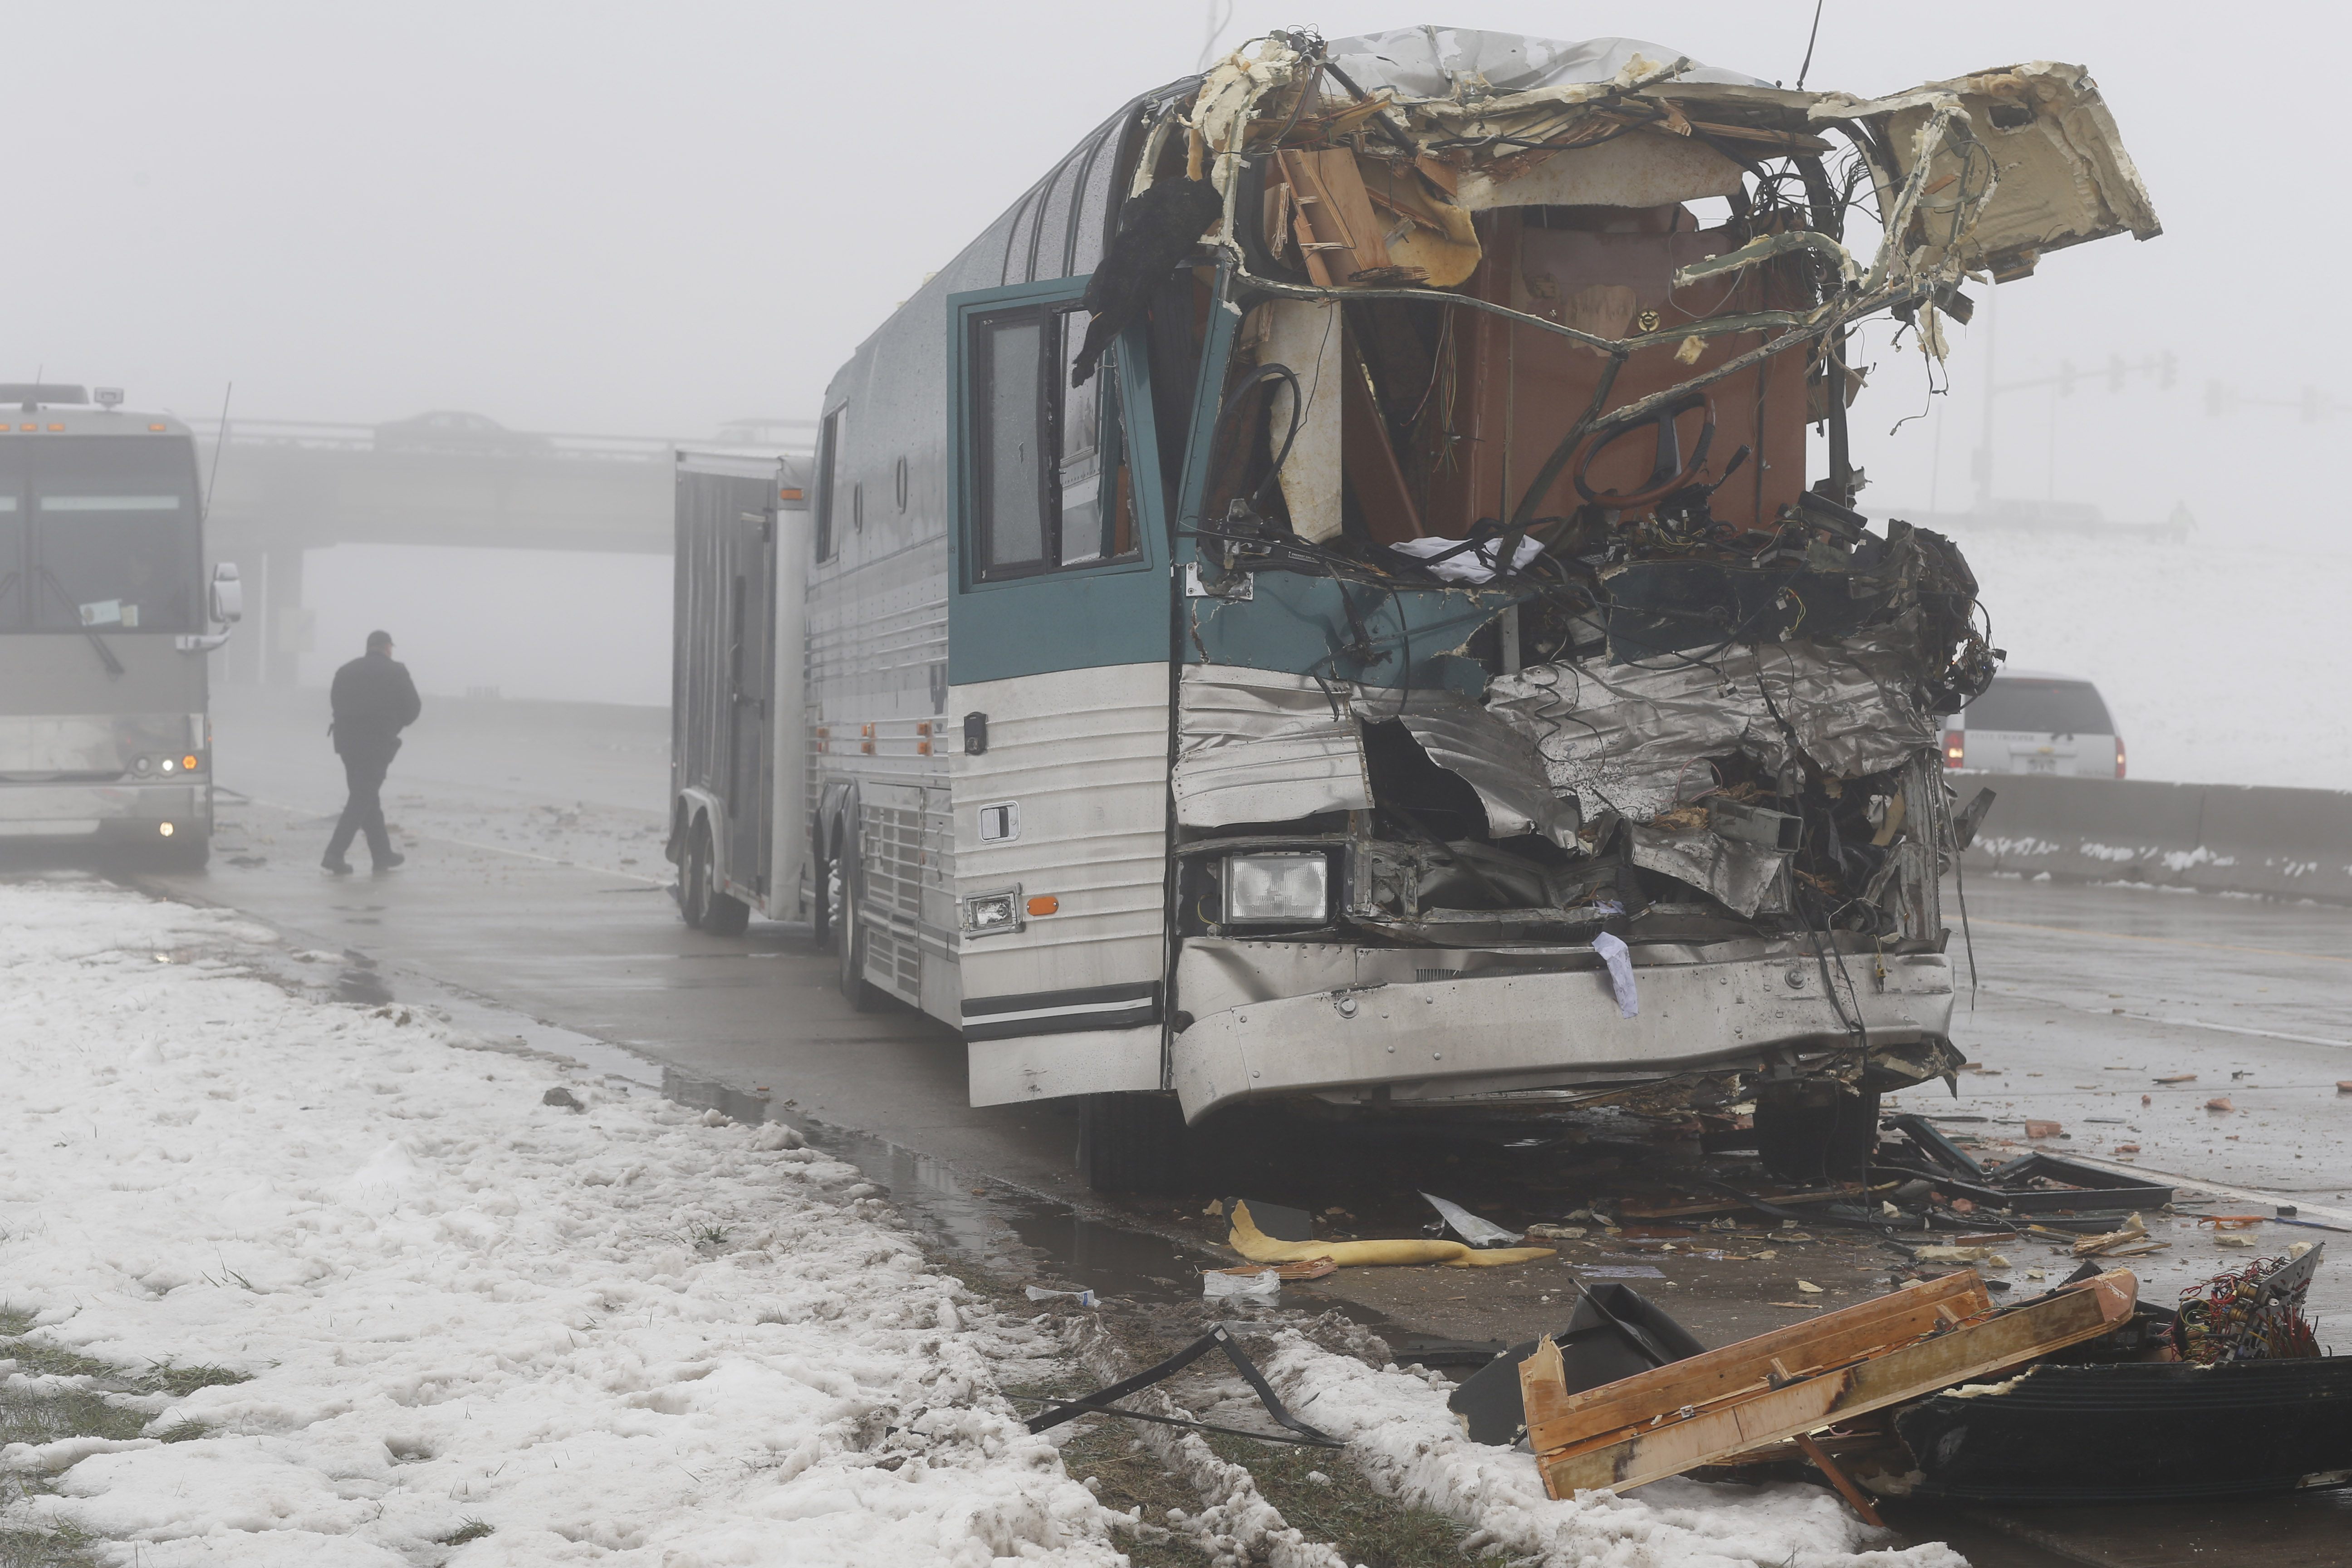 tour bus involved in an accident with a tractor trailer